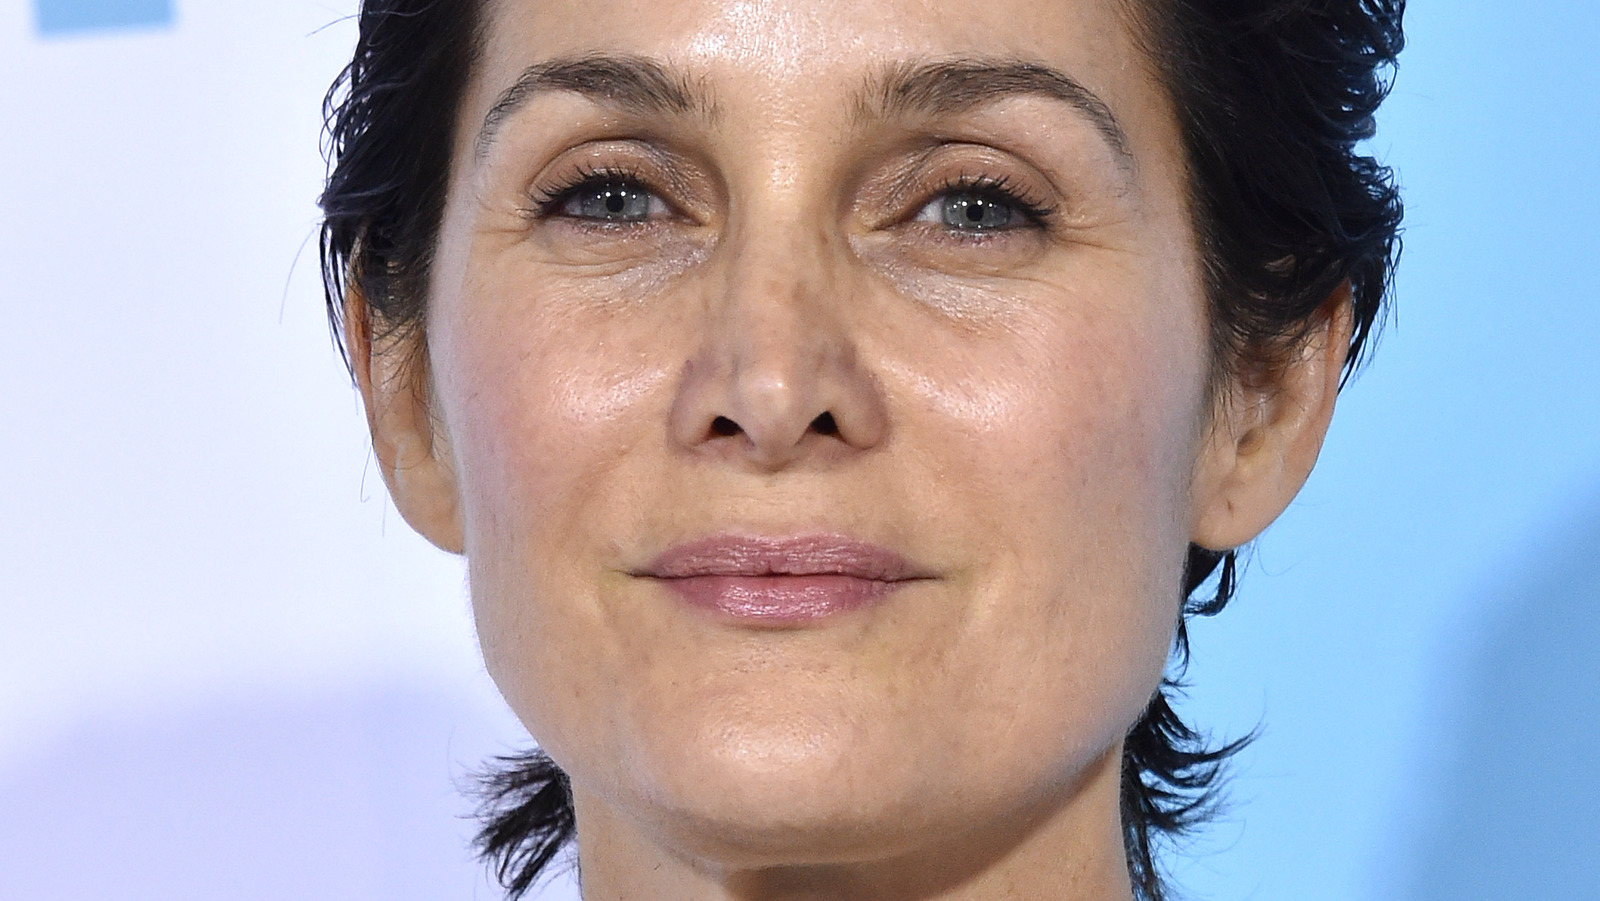 The Real Reason Carrie Anne Moss Stepped Away From The Spotlight